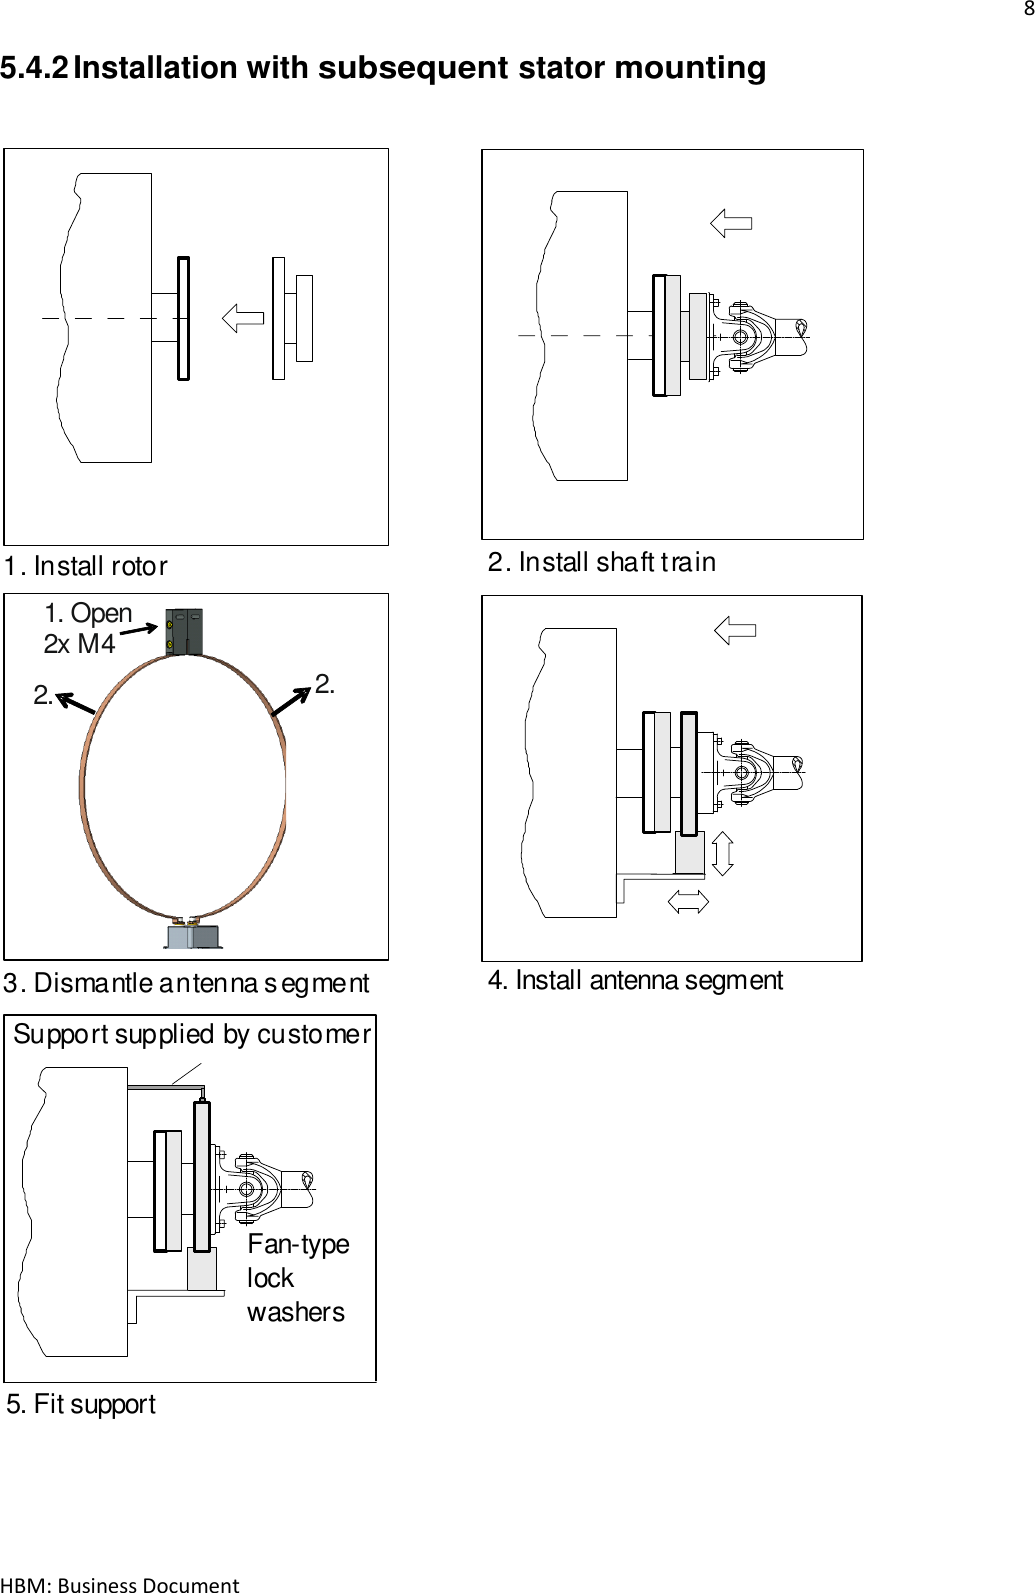 8  HBM: Business Document 5.4.2 Installation with subsequent stator mounting   2. Install shaft train3. Dismantle antenna segment 4. Install antenna segment1. Install rotor5. Fit support1. Open2x M4Fan-typelockwashersSupport supplied by customer2.2.